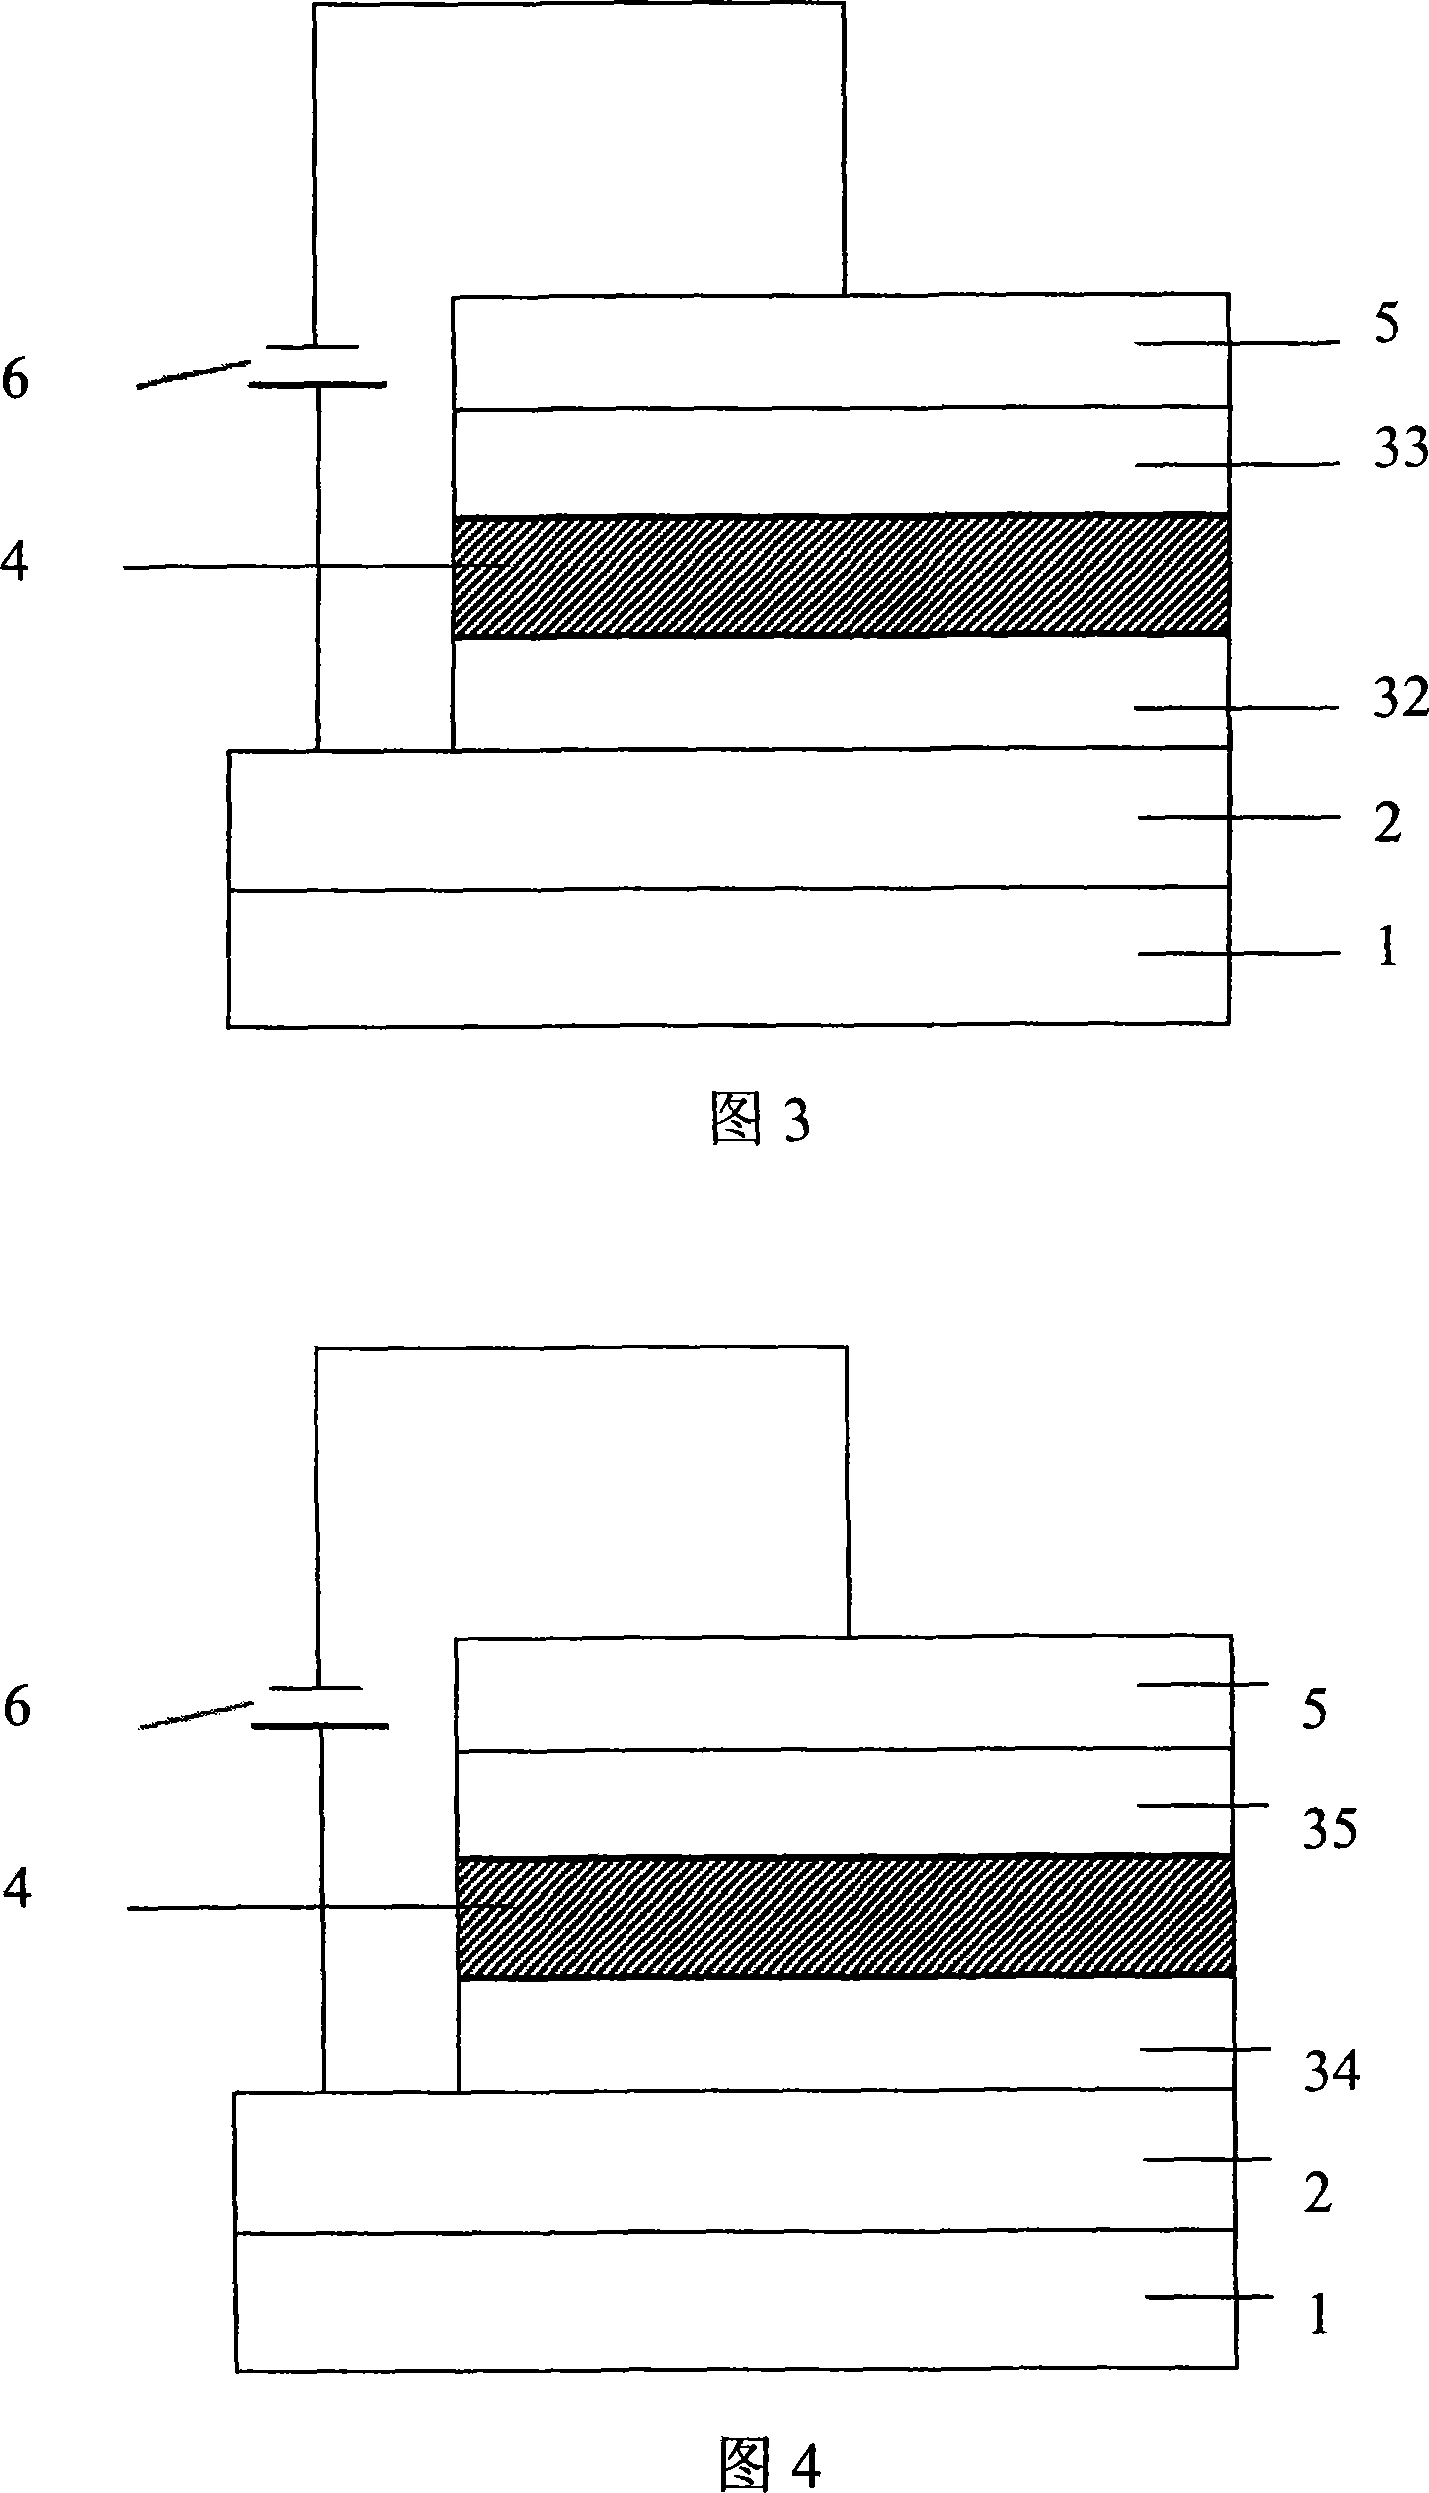 Novel electroluminescent device and method for producing the same